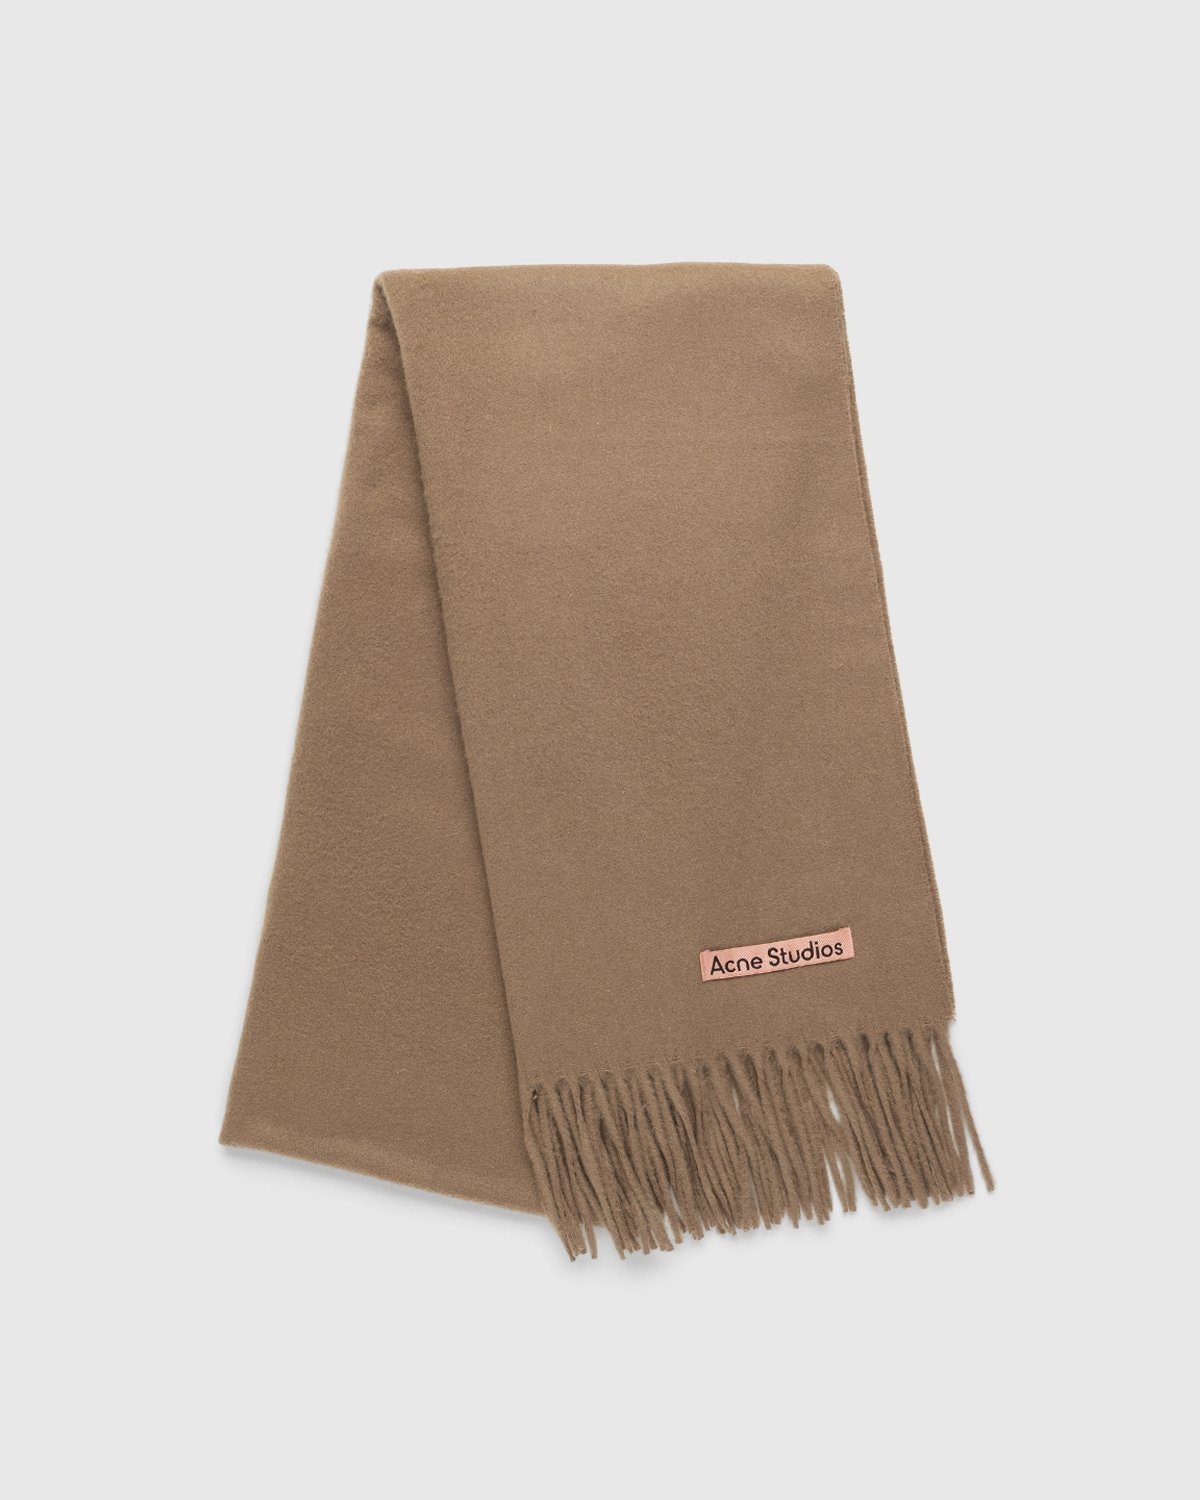 Acne Studios – Narrow Cashmere Scarf Caramel Brown - Knits - Brown - Image 1